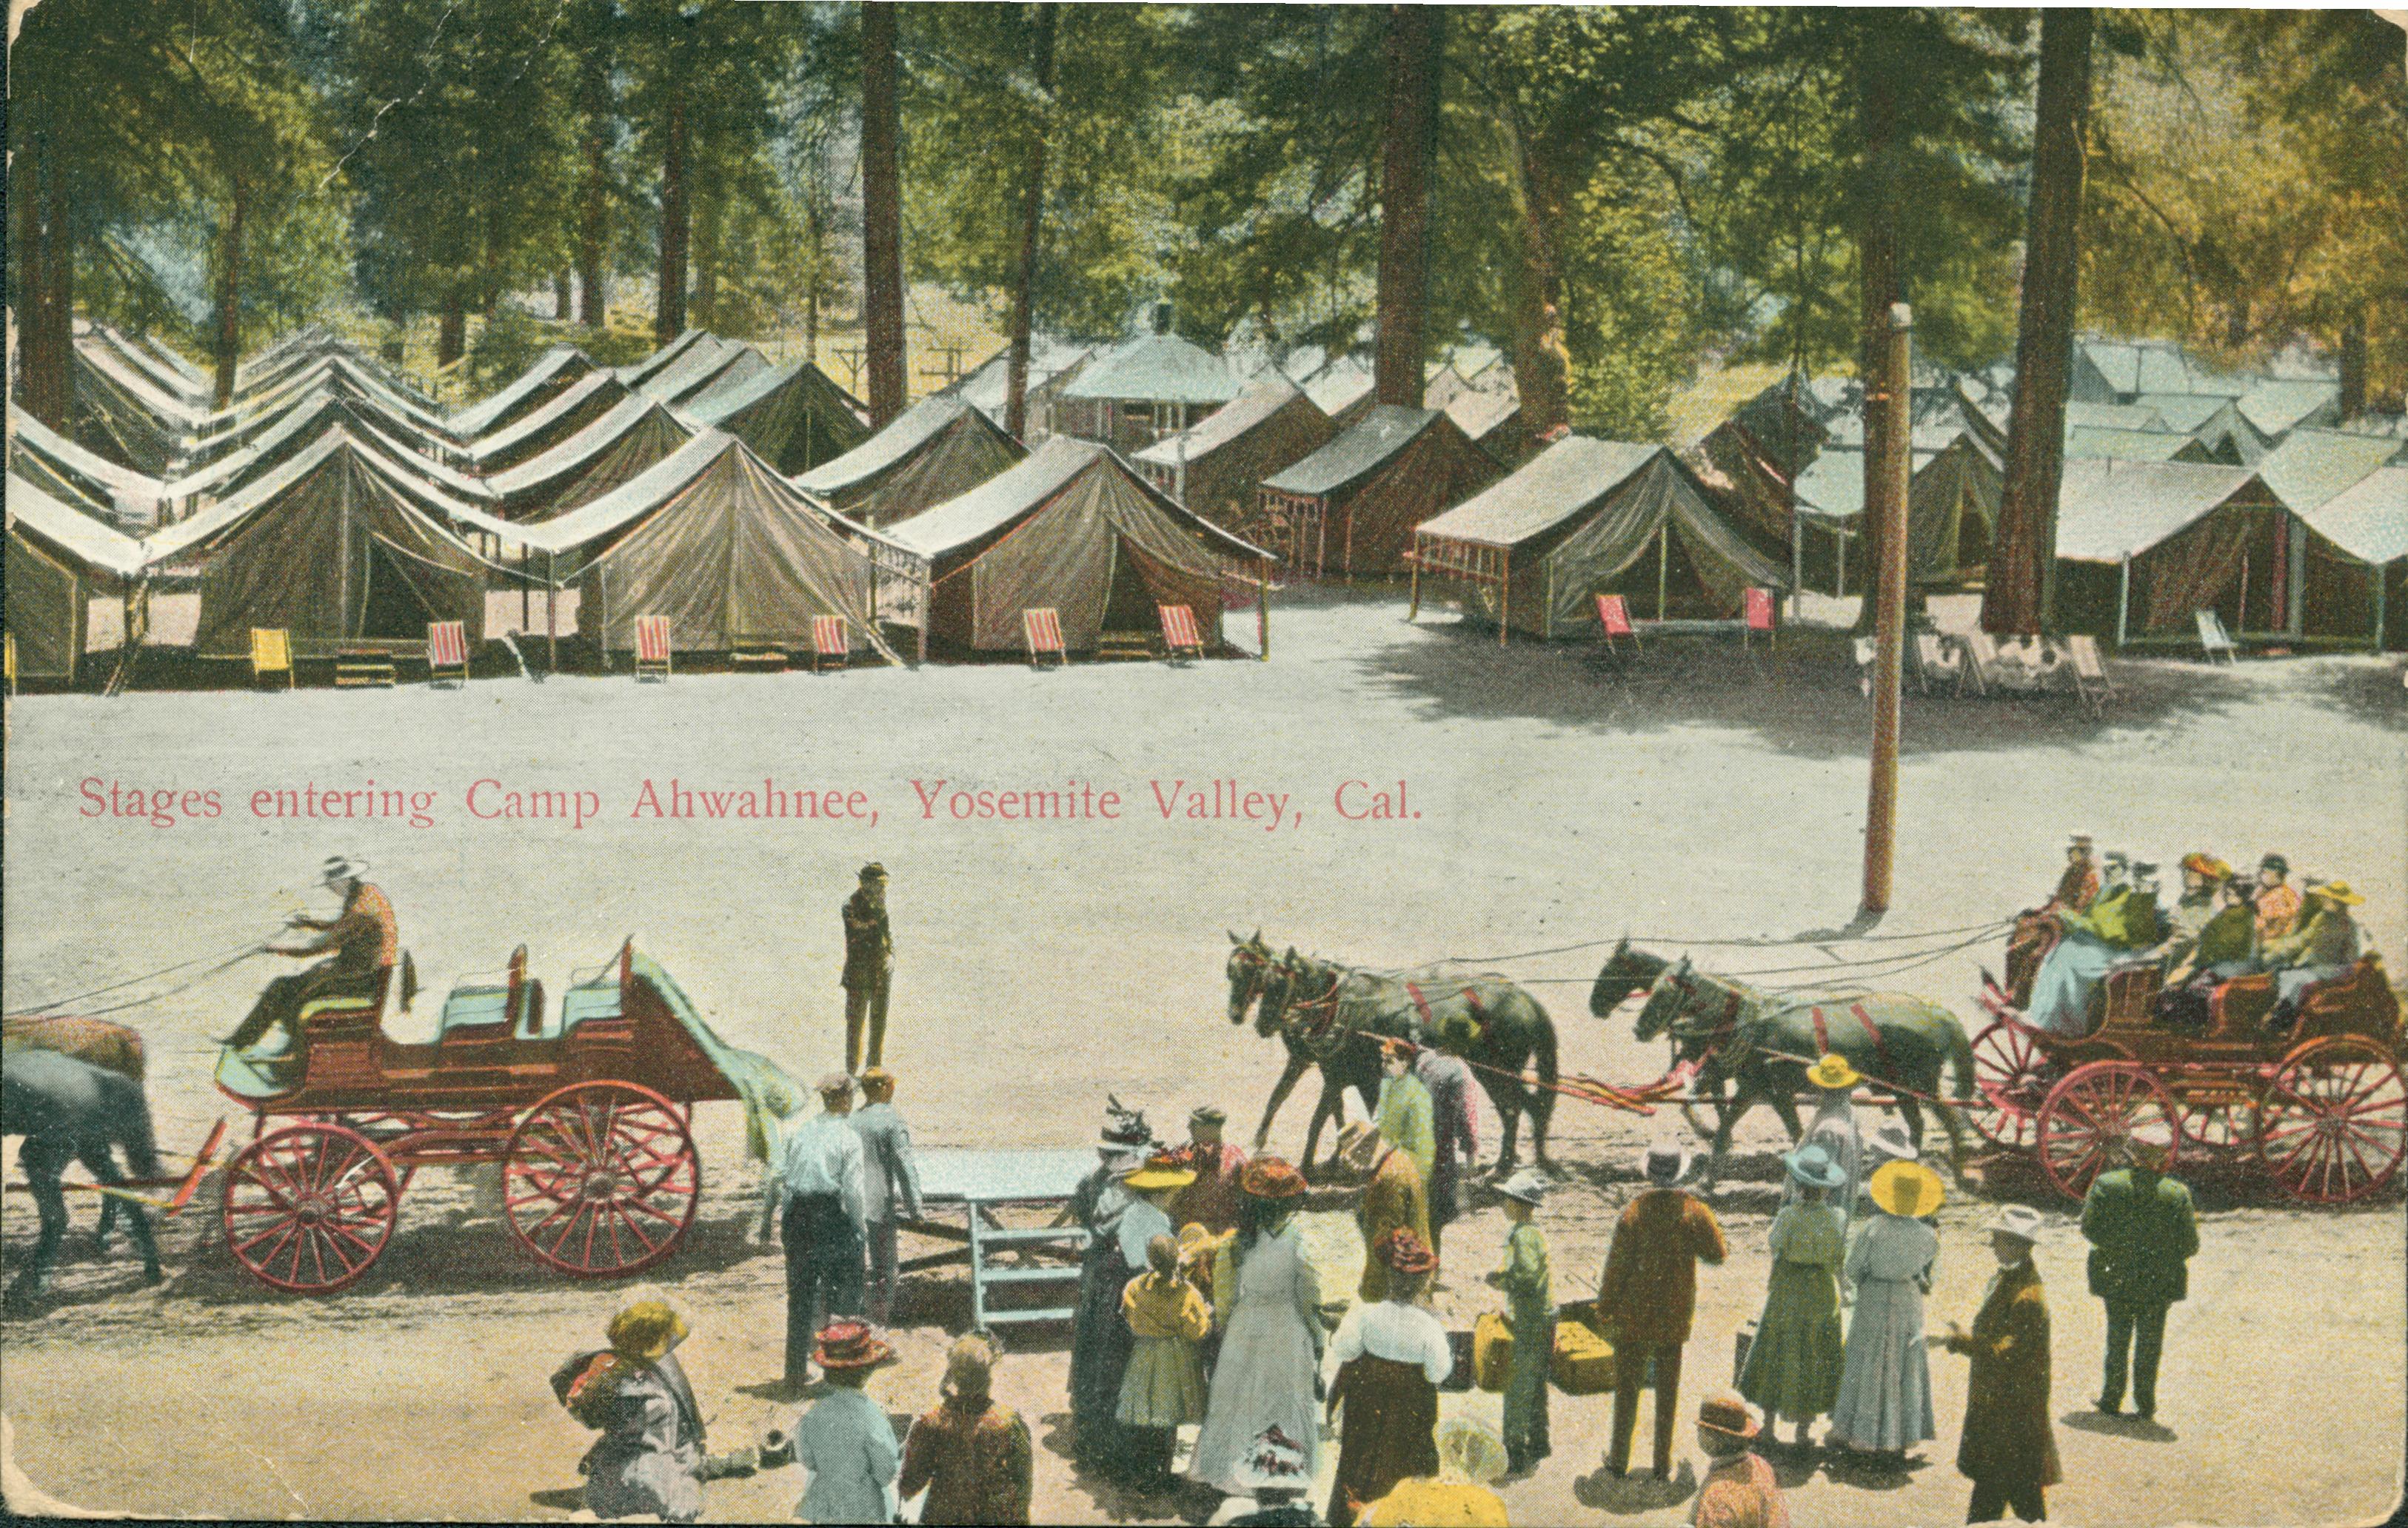 Shows two stagecoaches dropping people off, with a group of tents nestled between the trees in the background